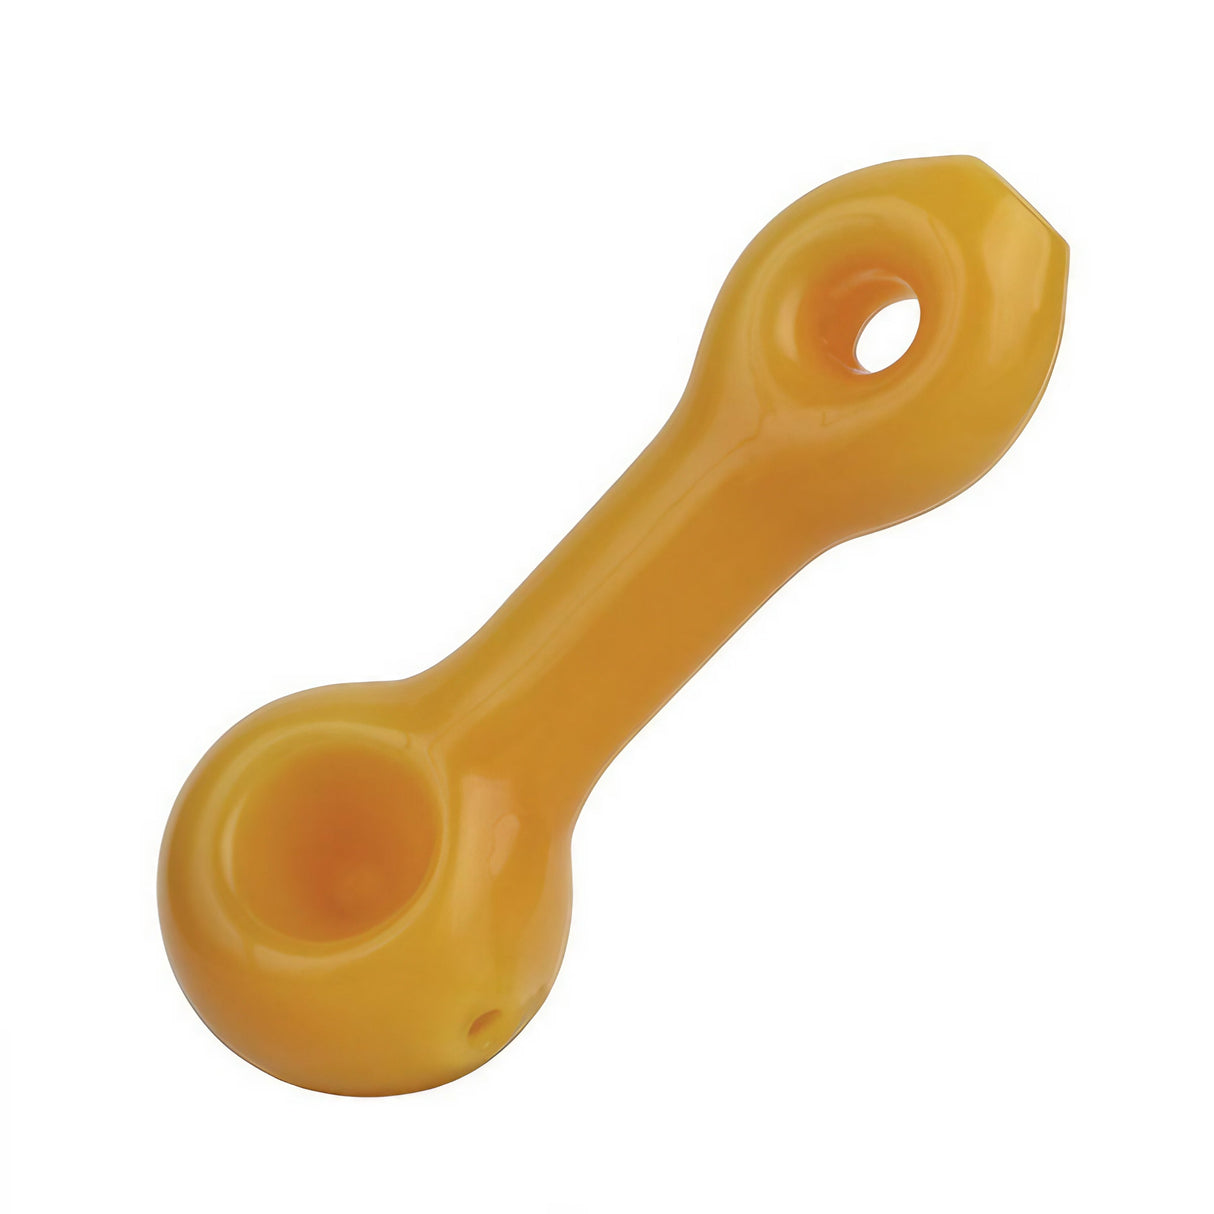 Pulsar Donut Handpipe - 3.5" Borosilicate Glass Spoon Pipe in Assorted Colors, Top View